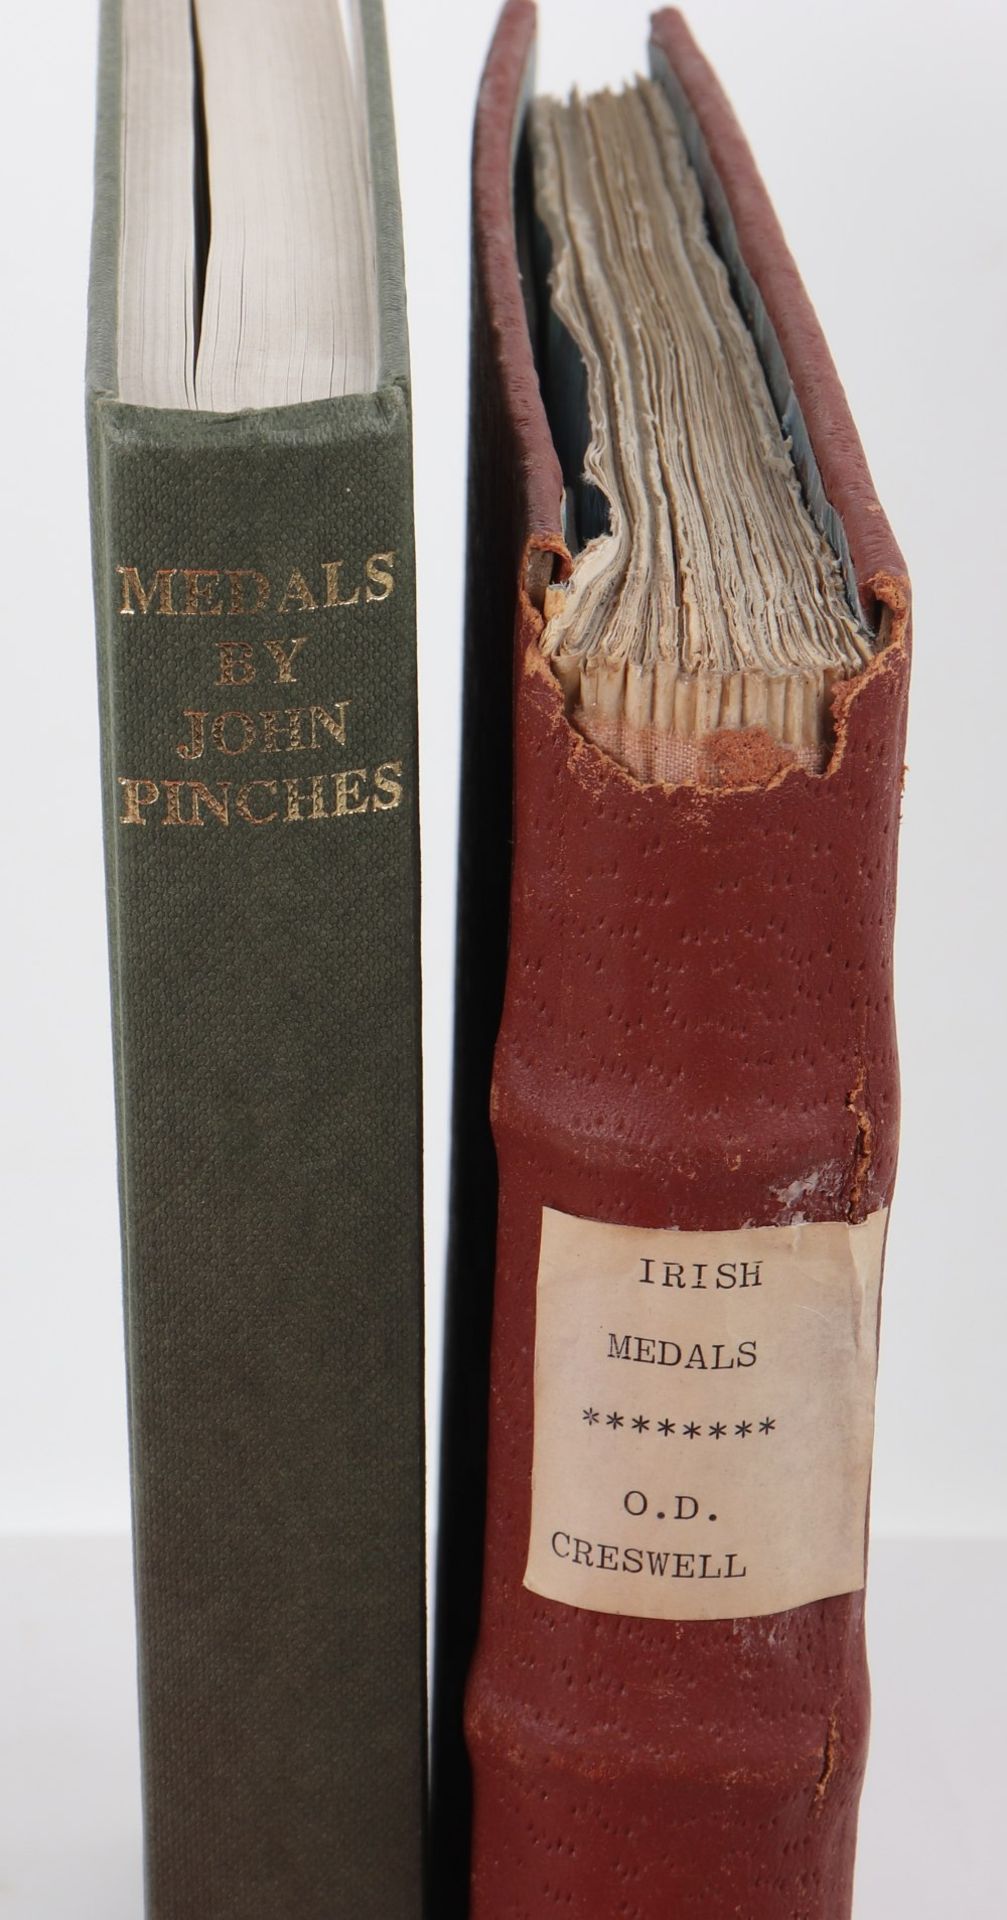 Irish Medals by Oliver Cresswell, 1961 - Image 2 of 2